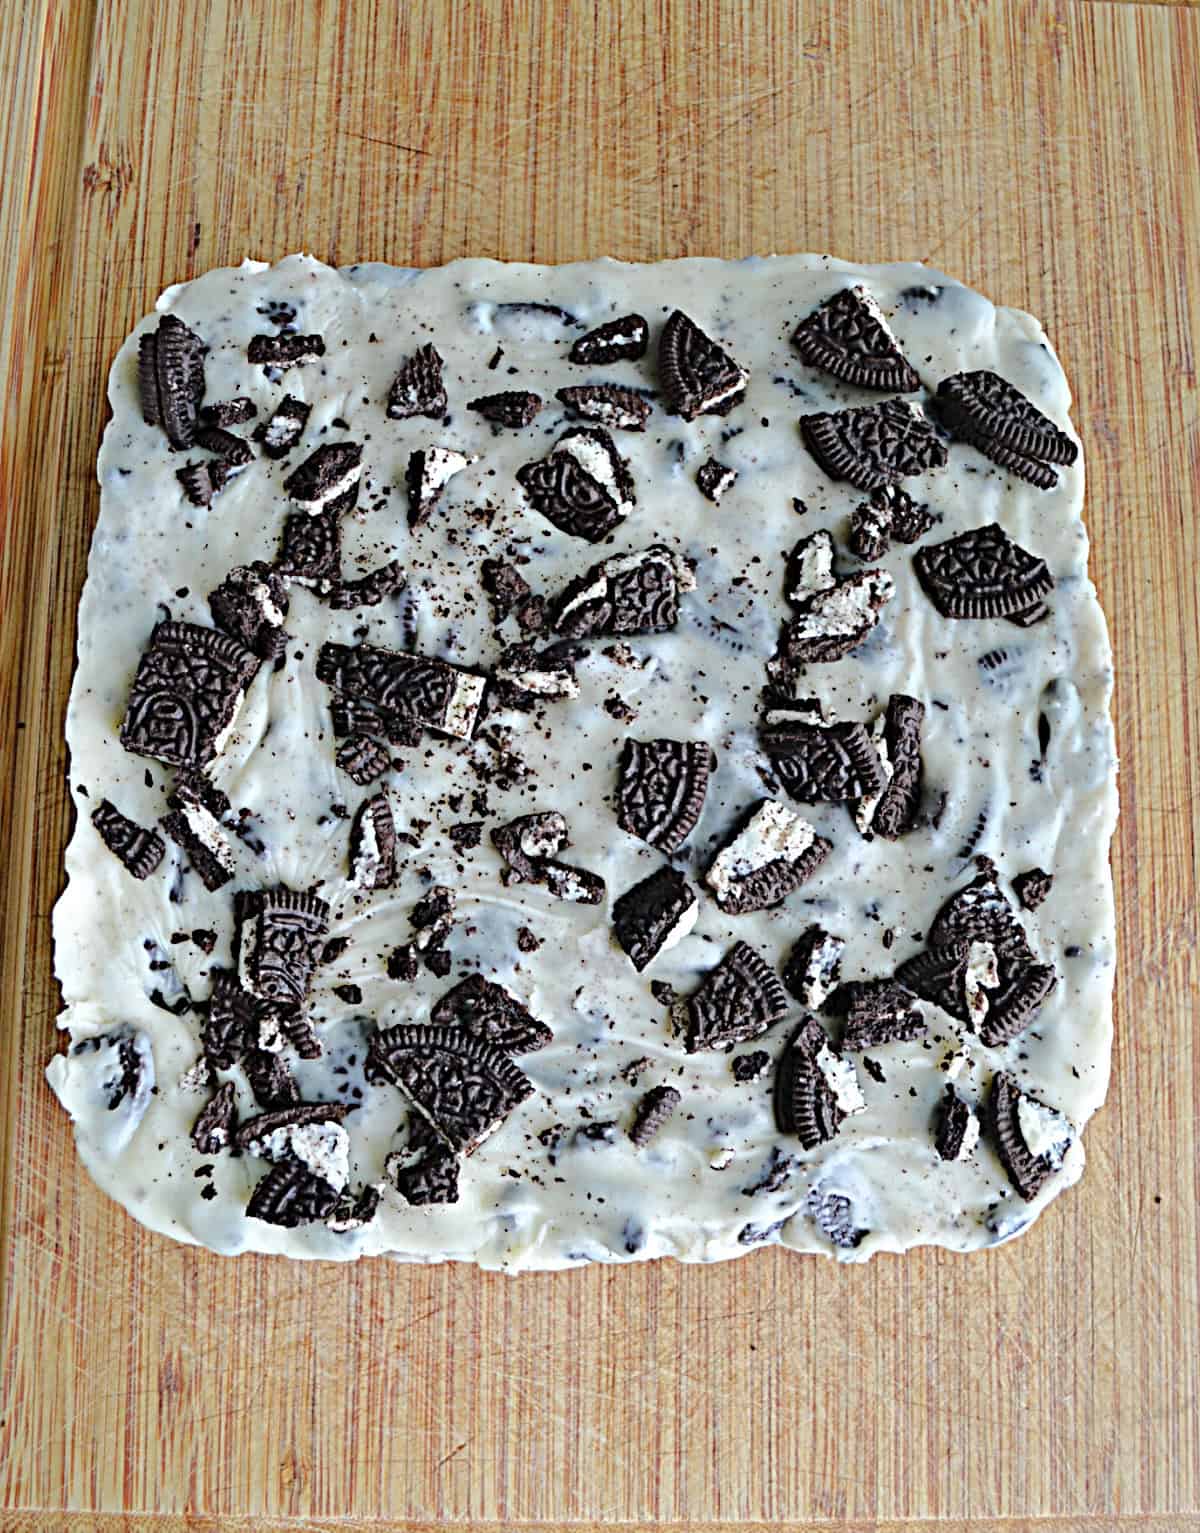 OREO cookie fudge after it has hardened.